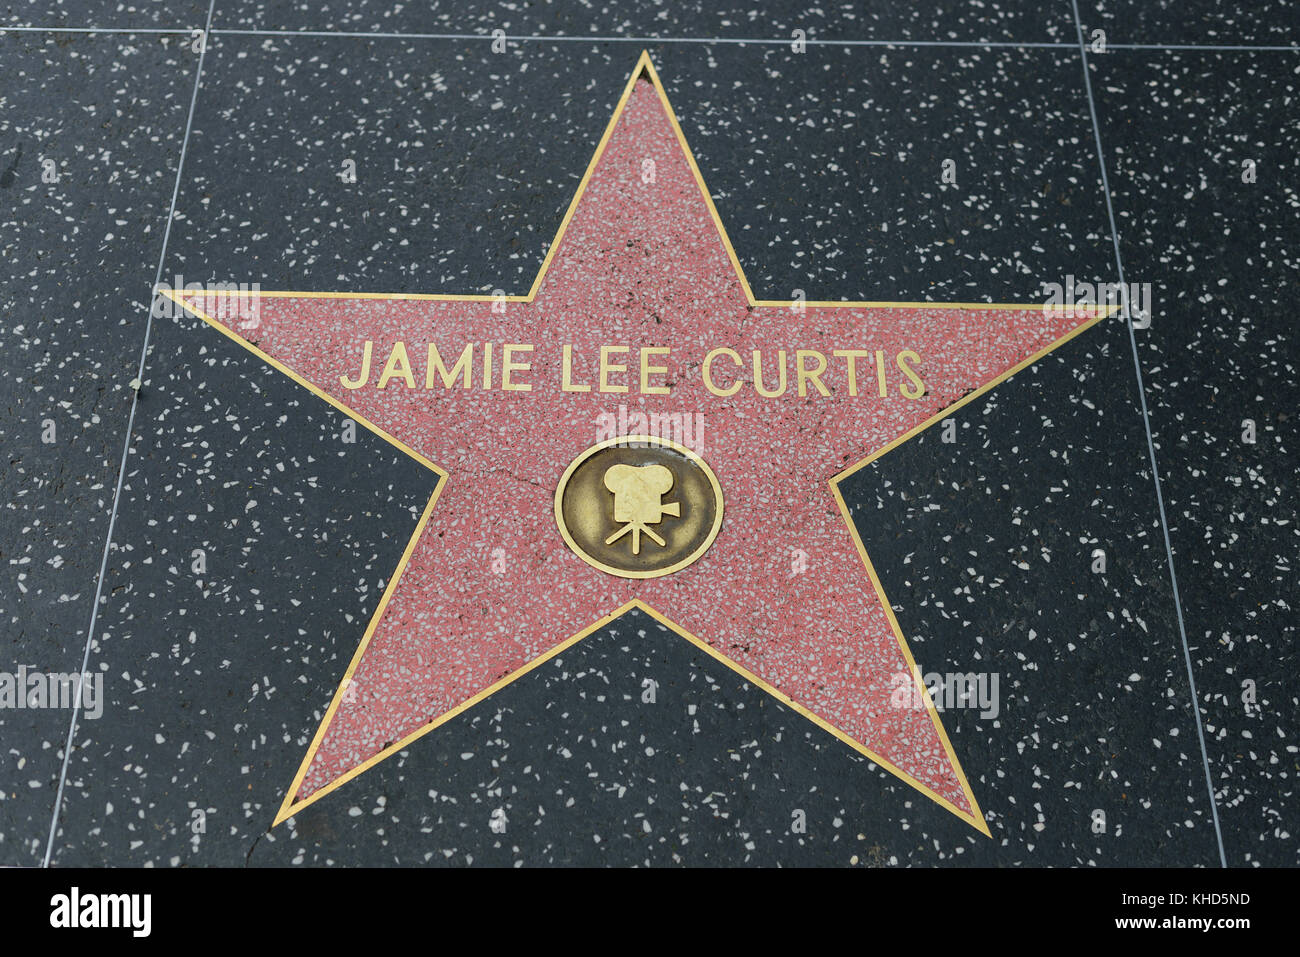 HOLLYWOOD, CA - DECEMBER 06: Jamie Lee Curtis star on the Hollywood Walk of Fame in Hollywood, California on Dec. 6, 2016. Stock Photo